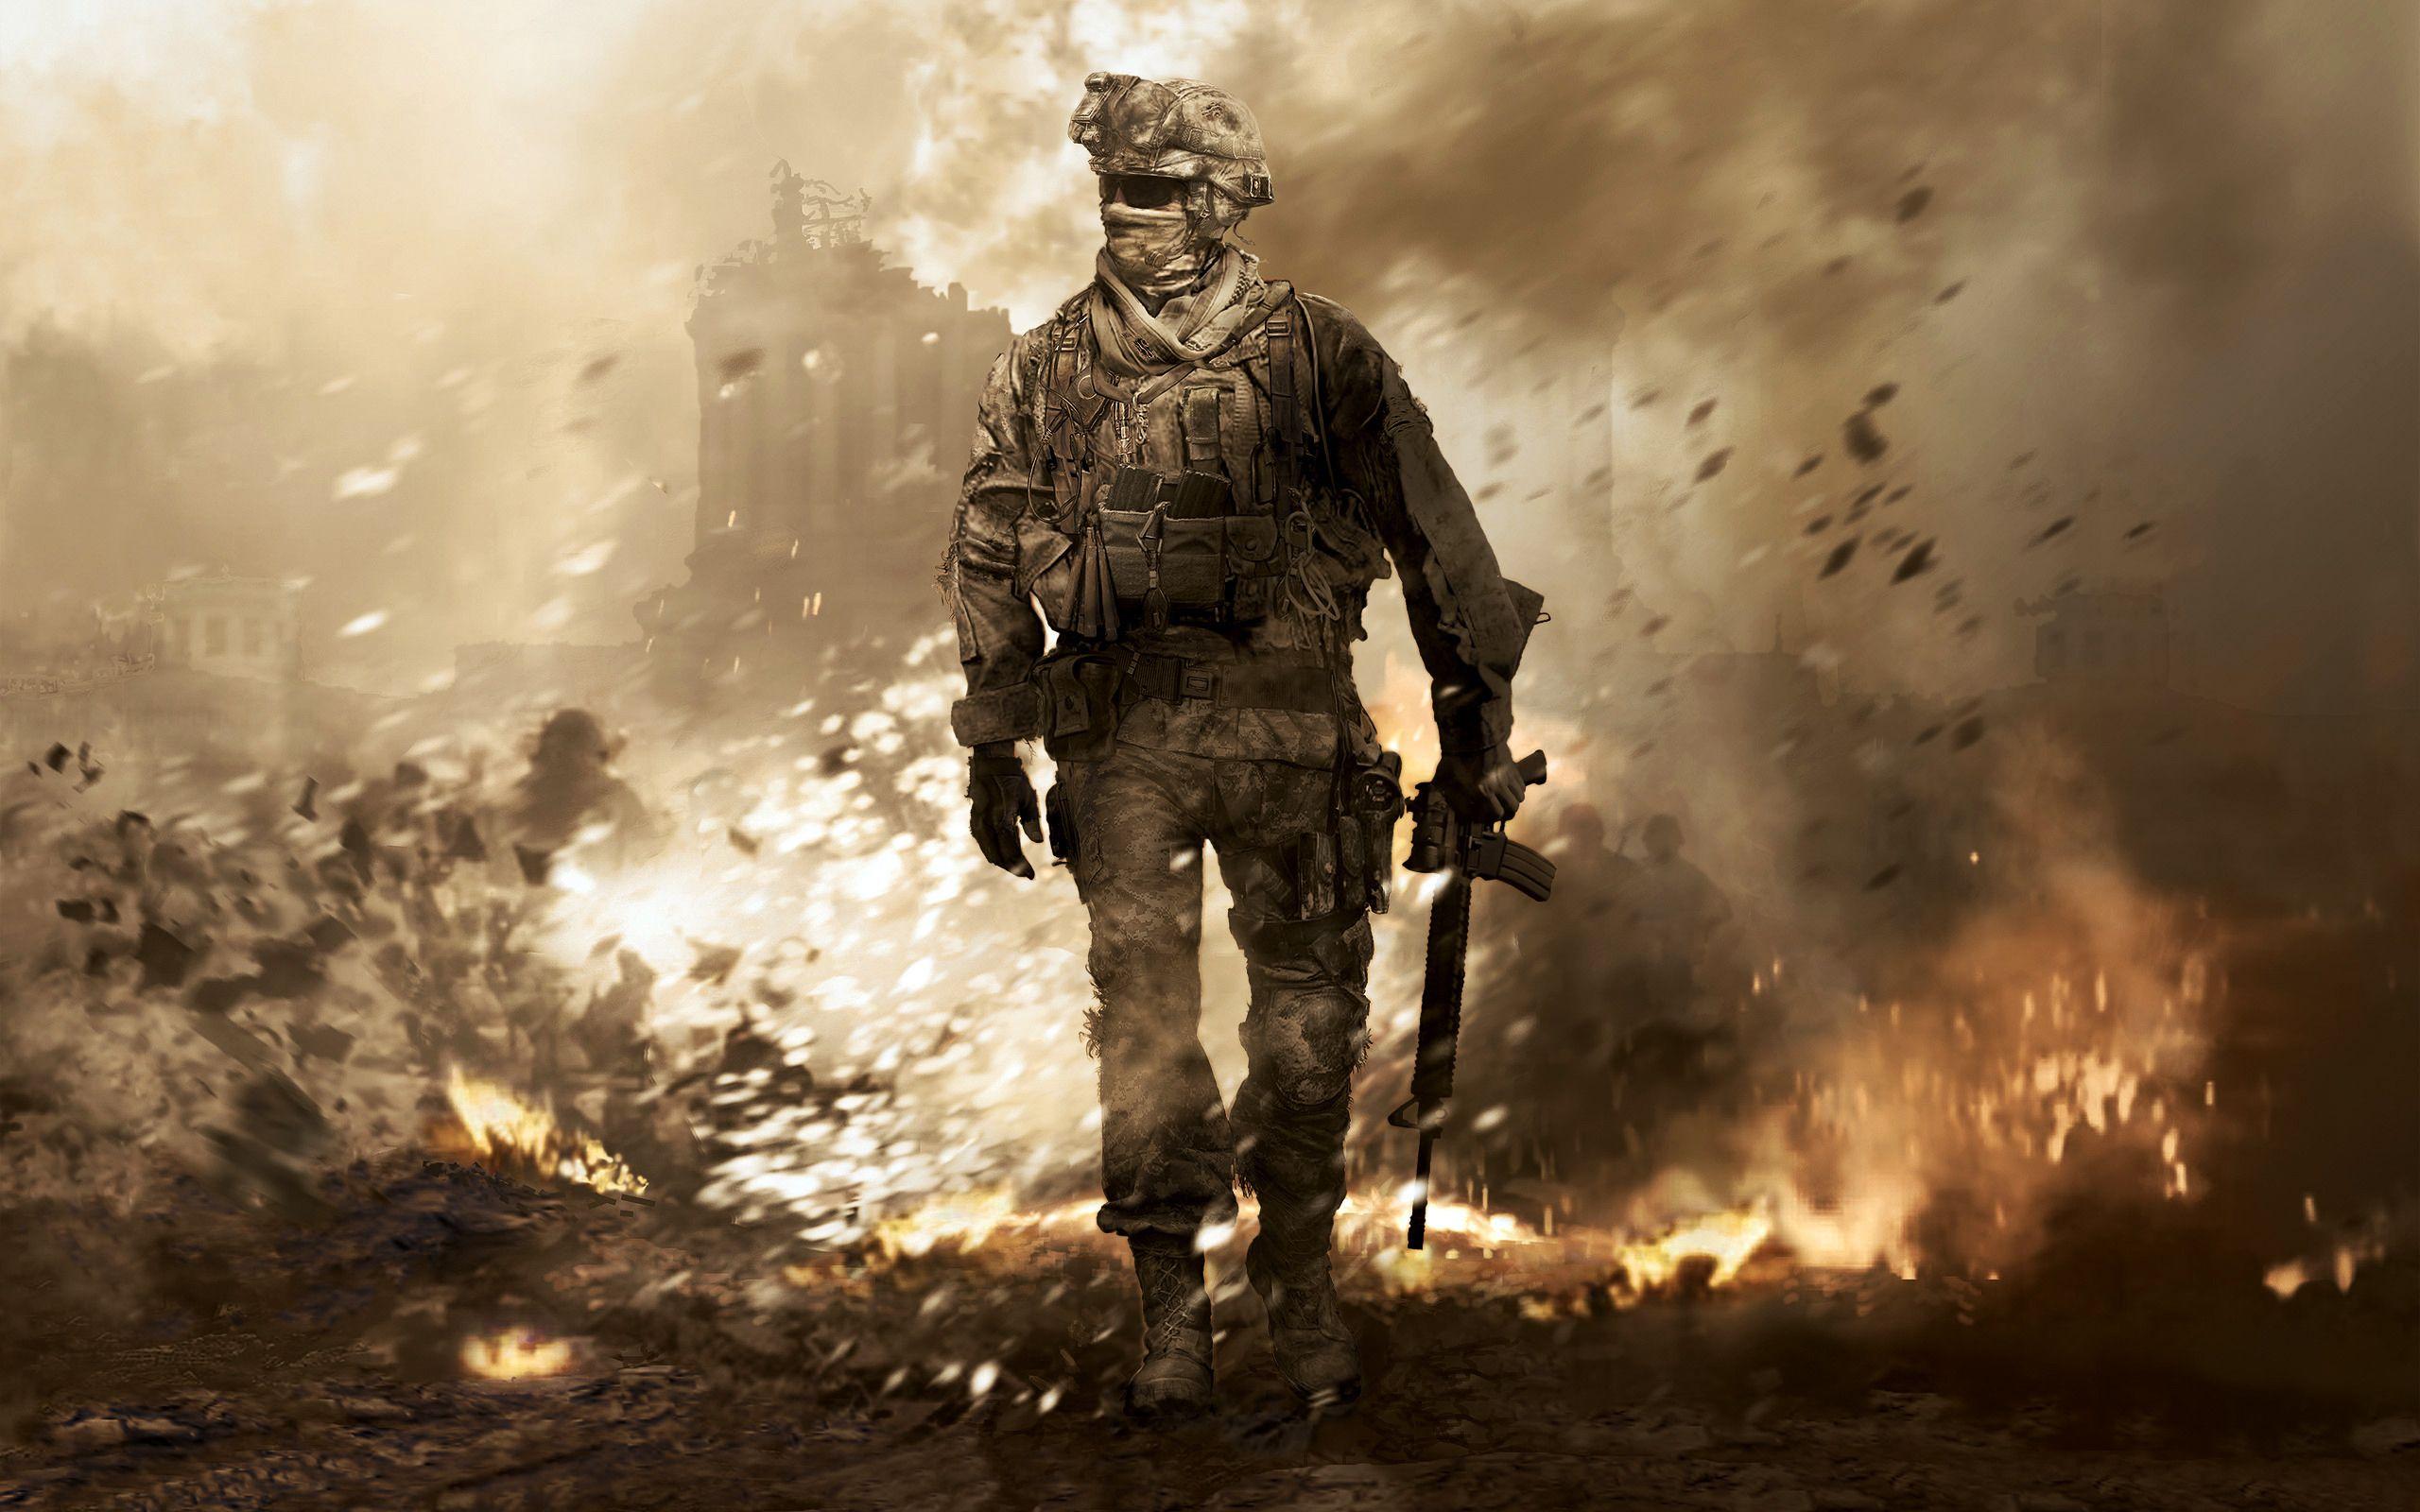 Cool Call of Duty Wallpaper Free Cool Call of Duty Background